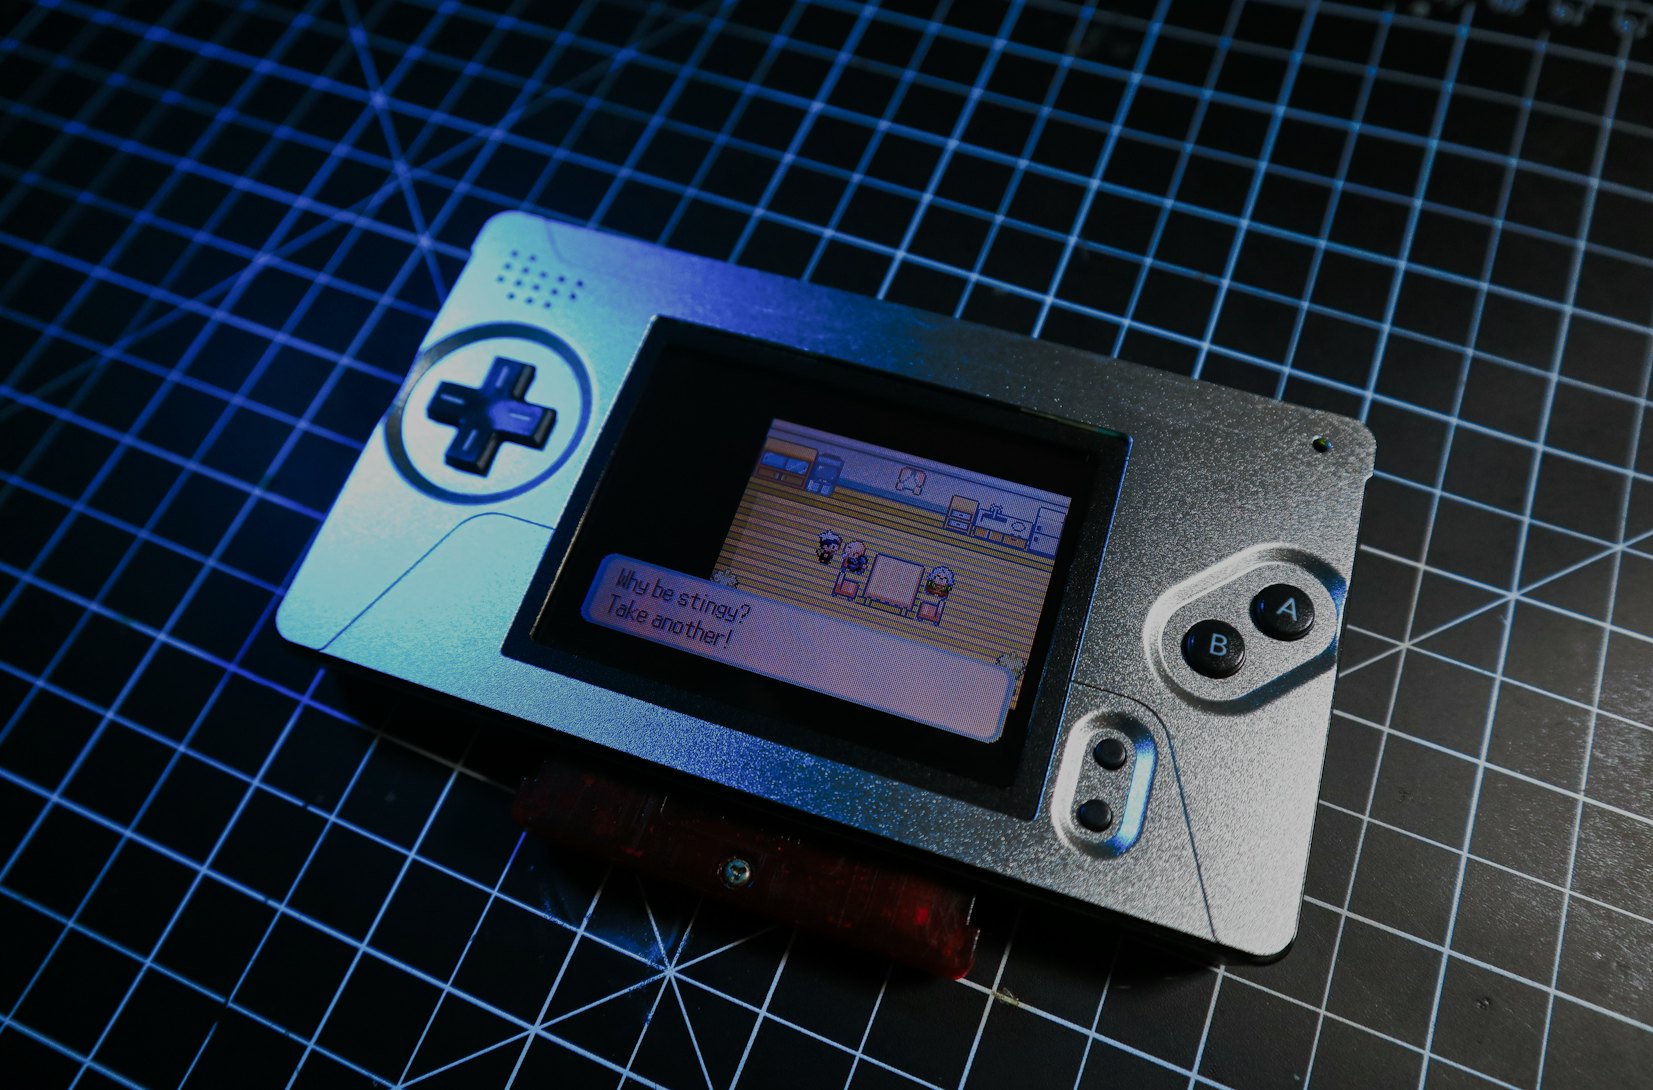 Sonic 1 GBA Hack - But does it work on Real Hardware? 